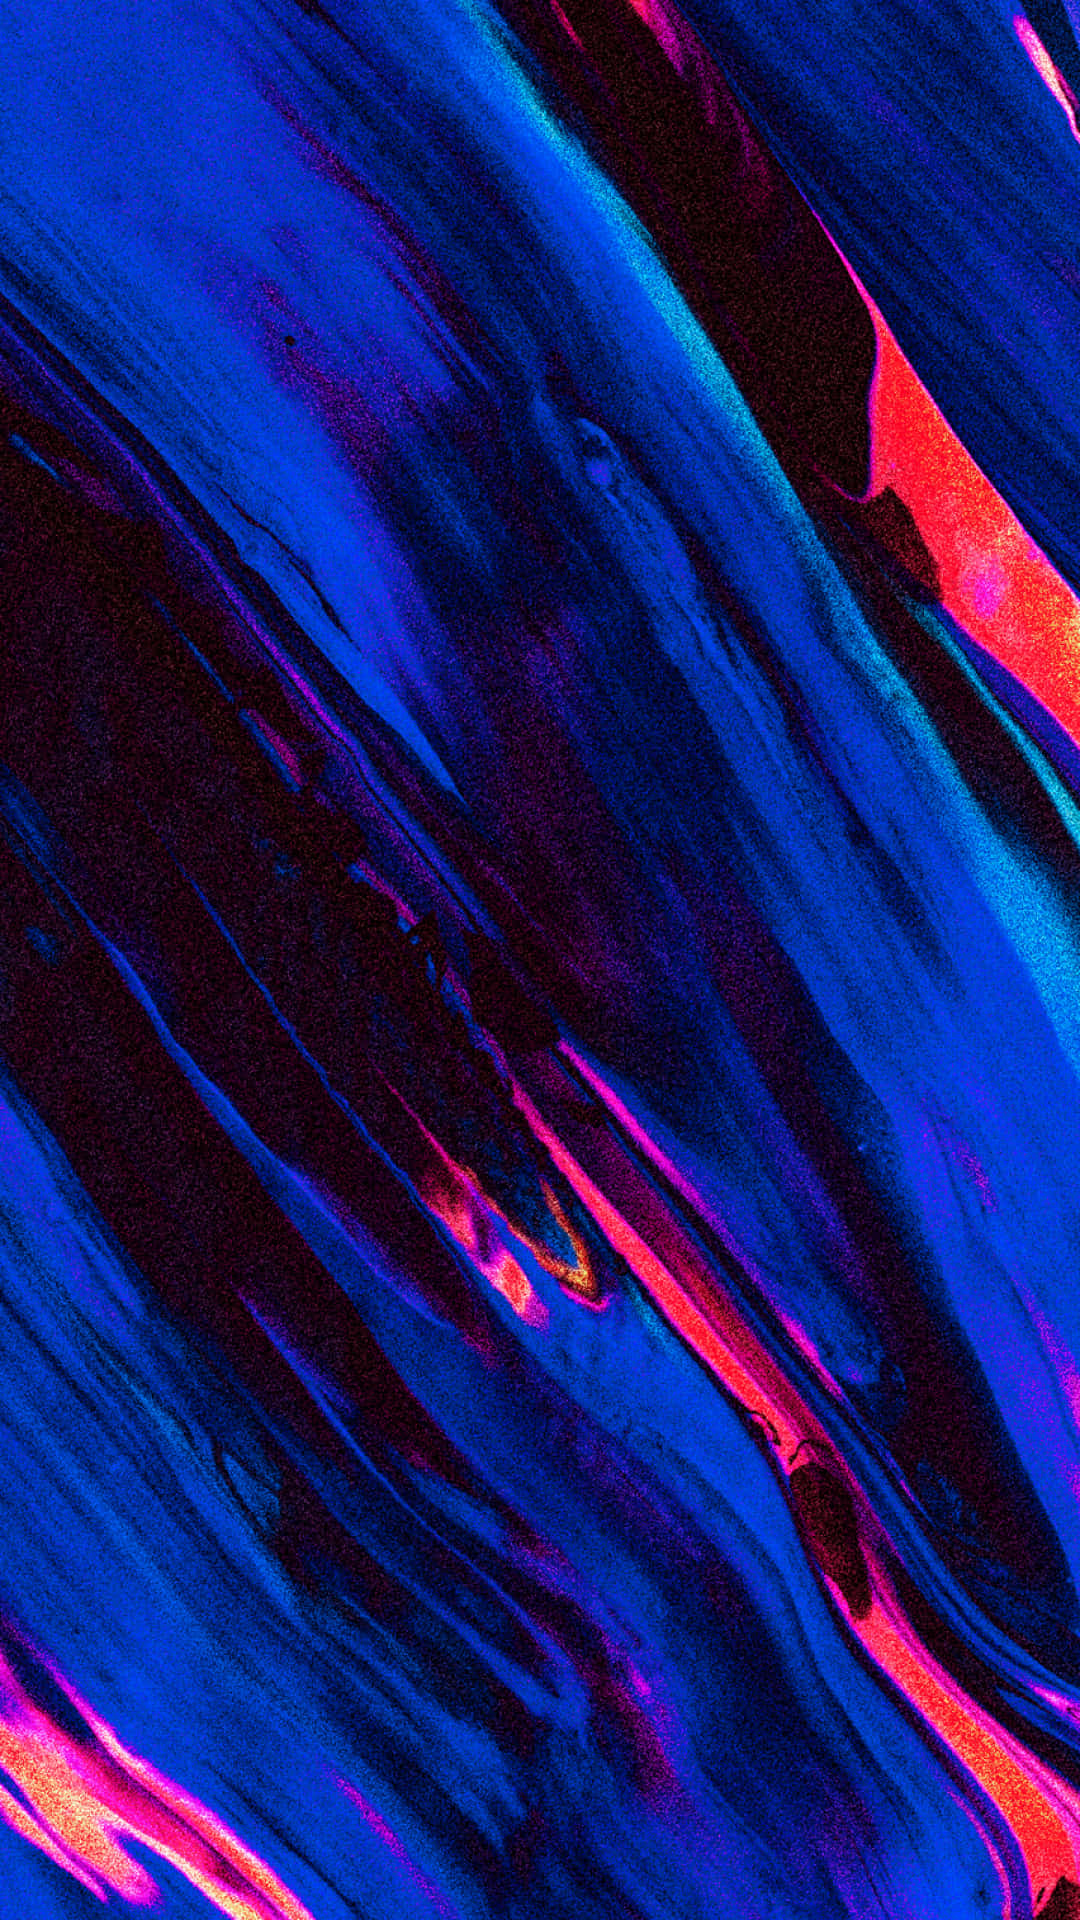 Iphone X Abstract Blue And Magenta Wallpaper